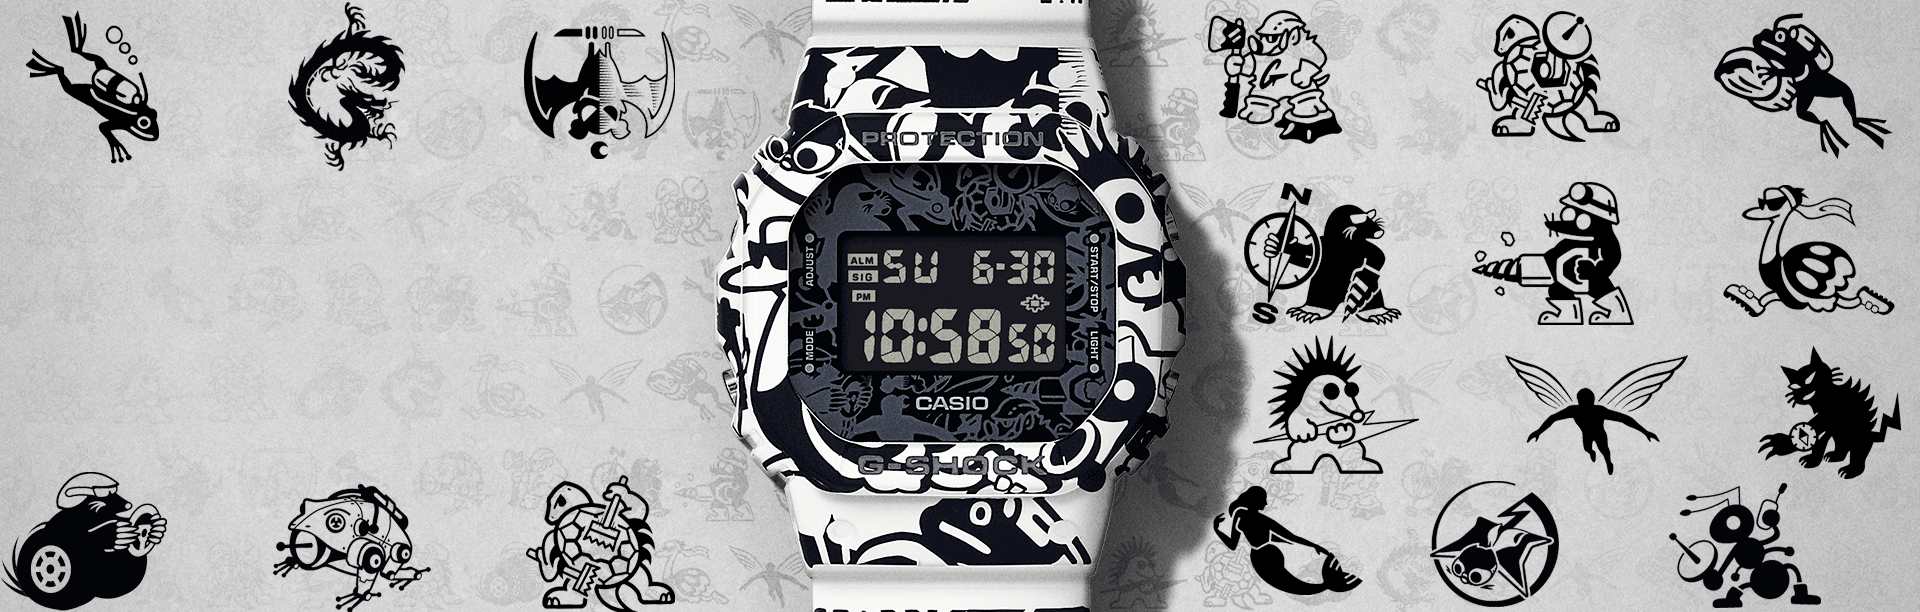 18 animated Master of G characters surrounding DW5600GU-7 watch